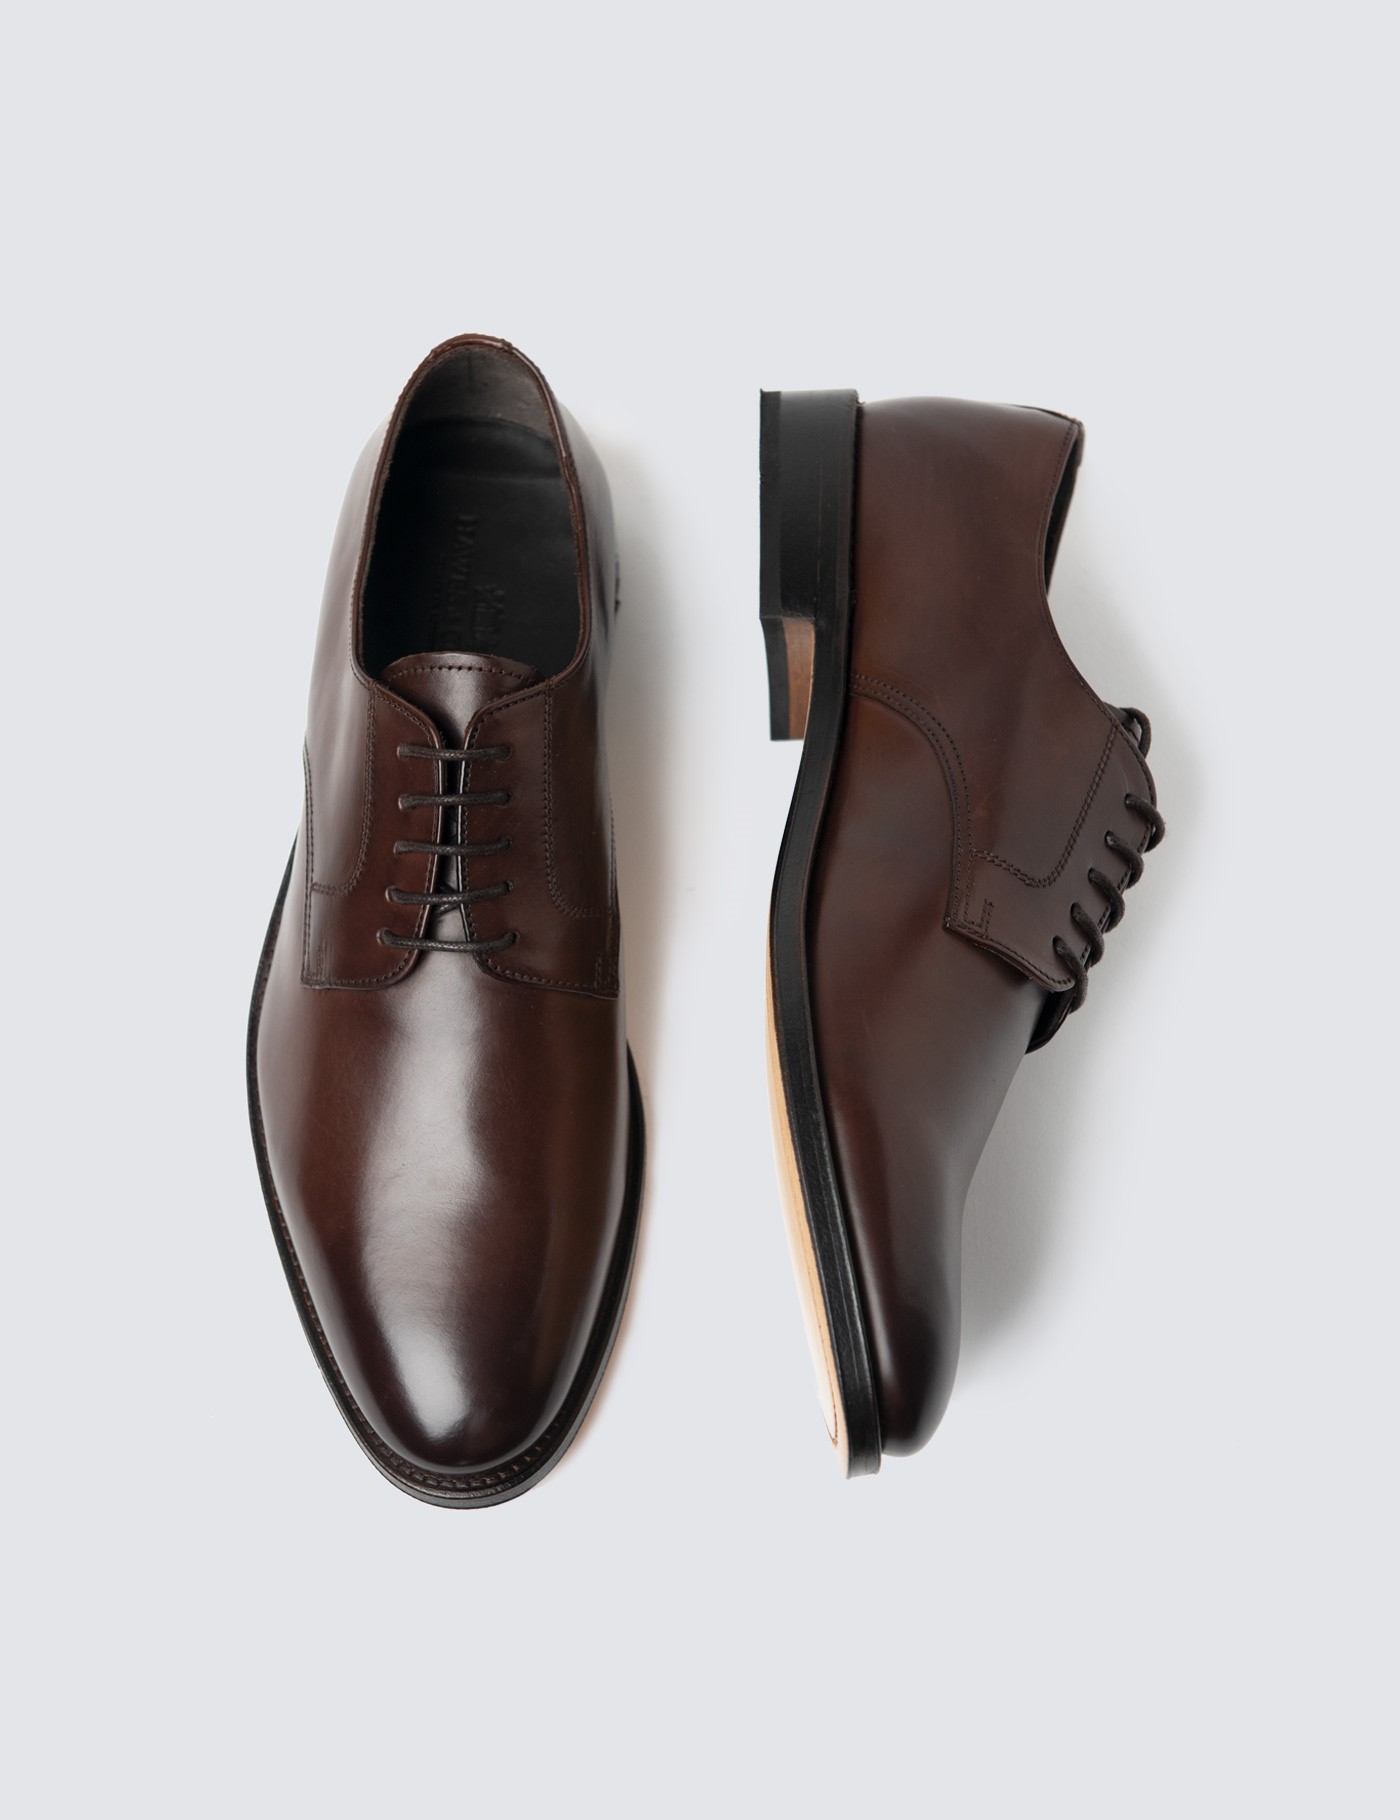 Leather Men's Shoe with Derby Lace Up in Brown | Hawes & Curtis | UK